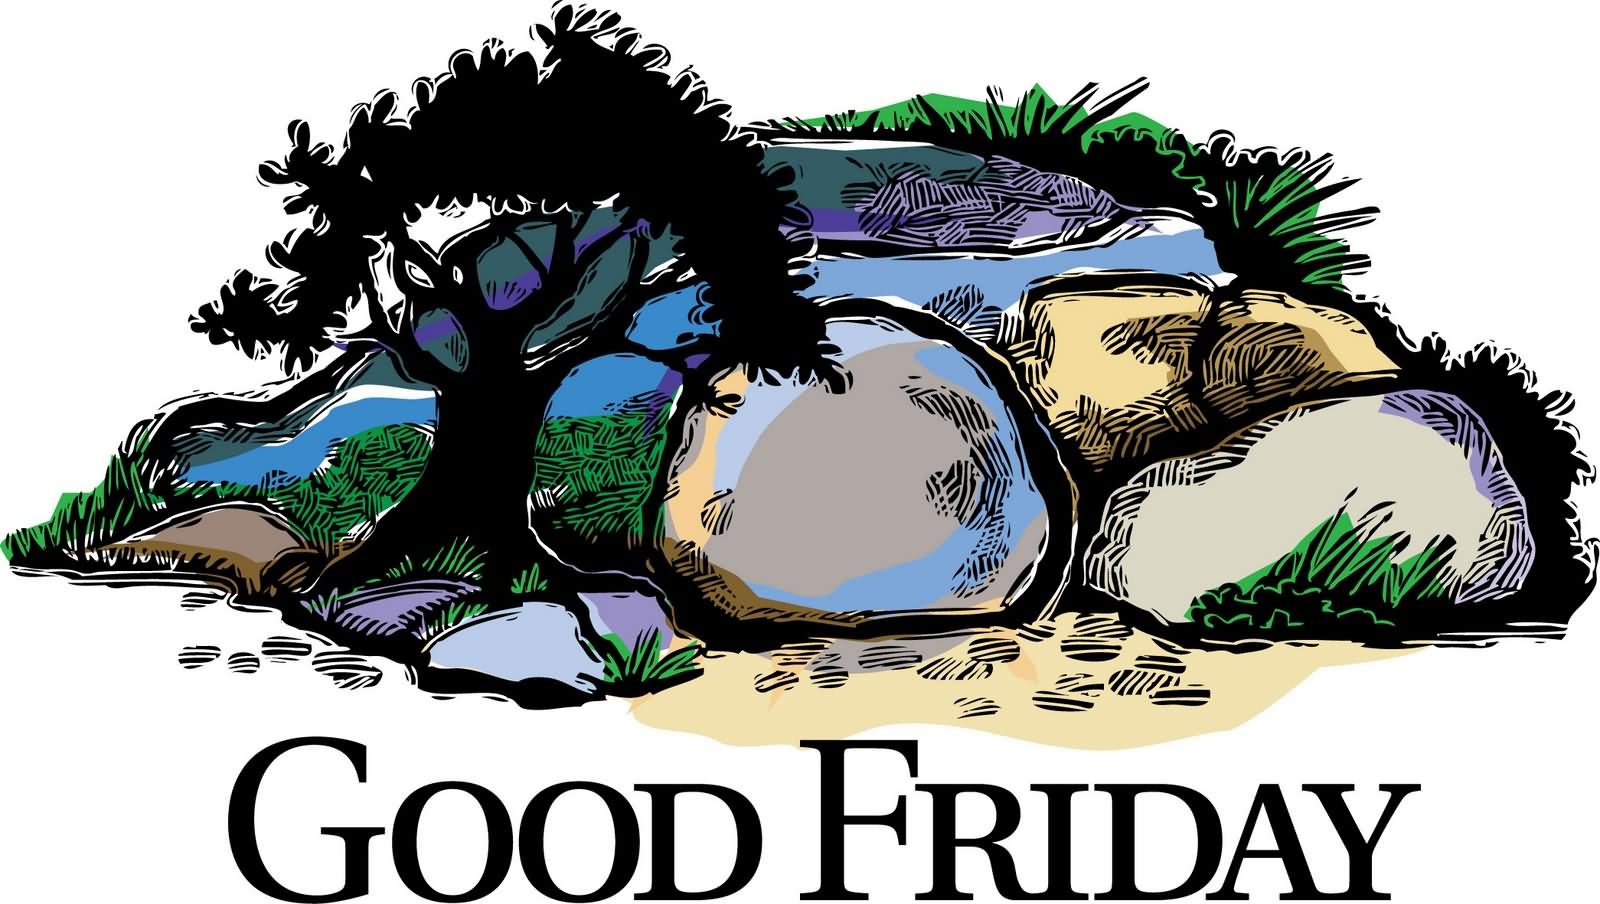 Friday Clipart